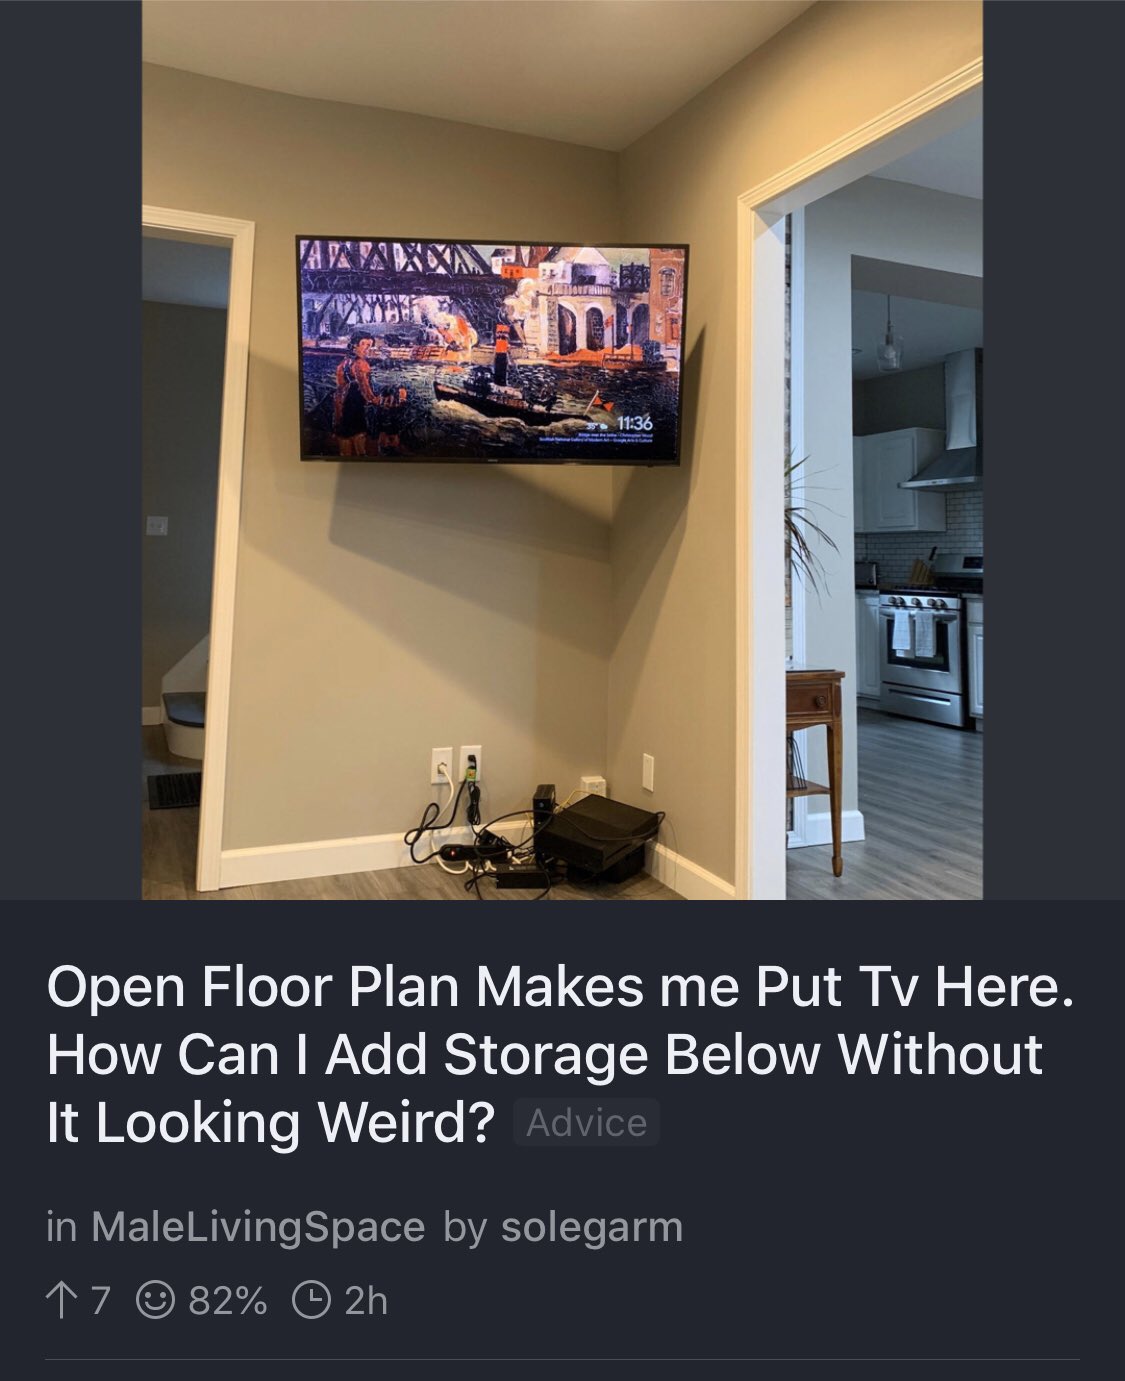 display advertising - Adaxxati Open Floor Plan Makes me Put Tv Here. How Can I Add Storage Below Without It Looking Weird? Advice in MaleLivingSpace by solegarm 17 82% 2h